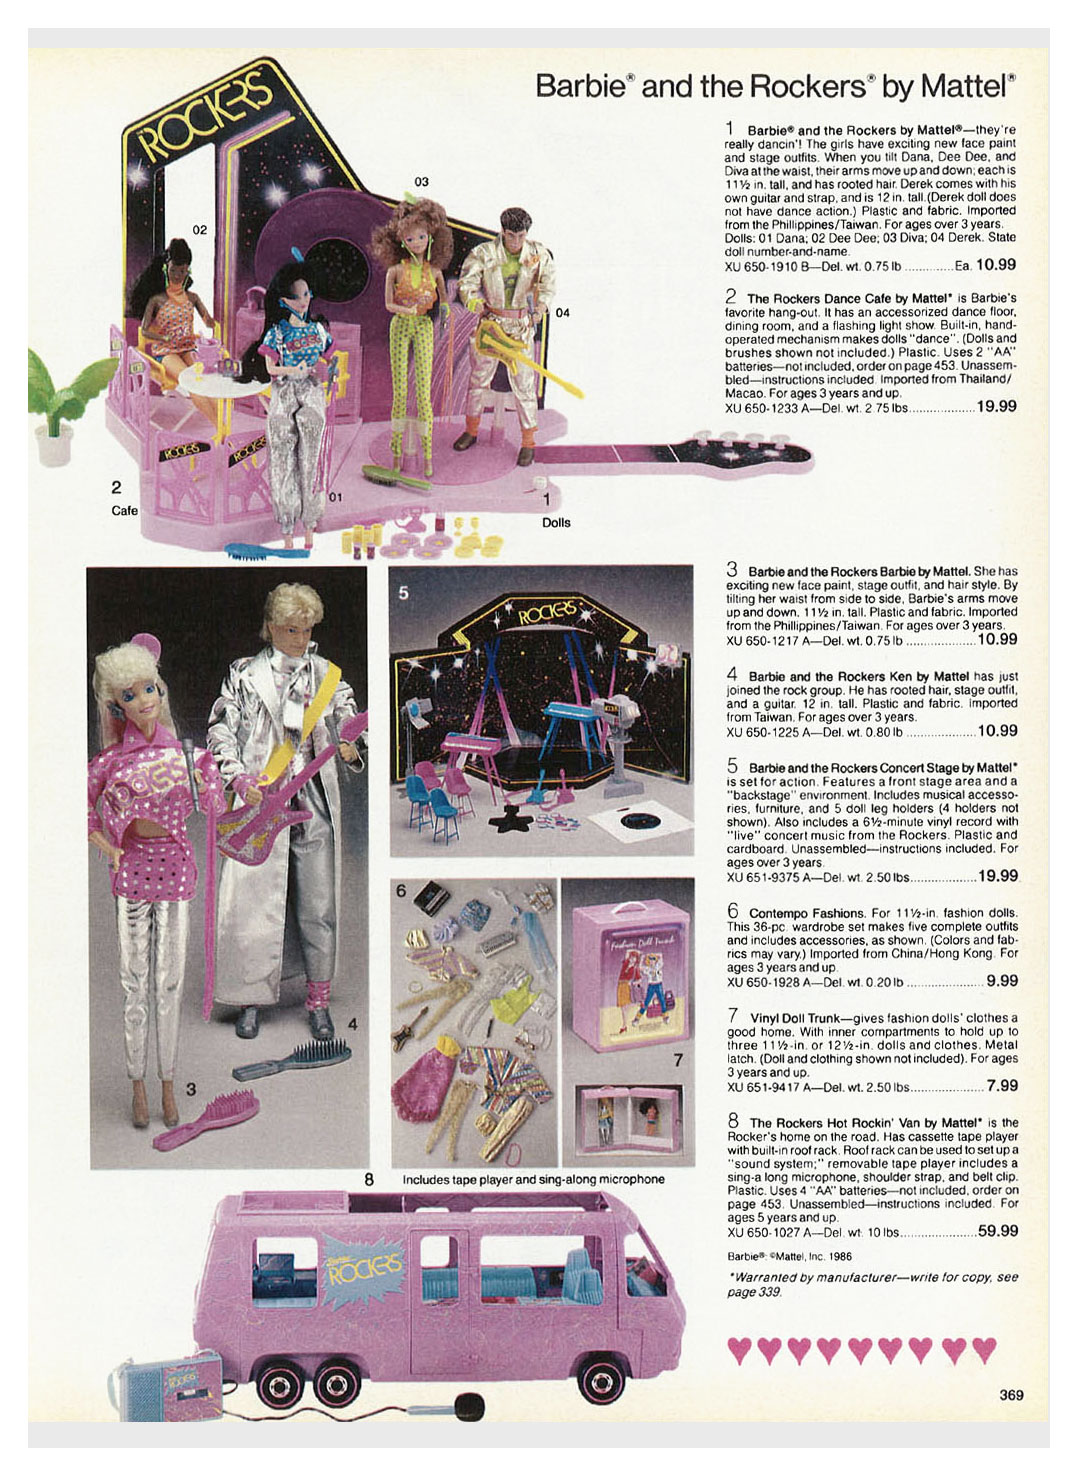 From 1987 JCPenney Christmas catalogue